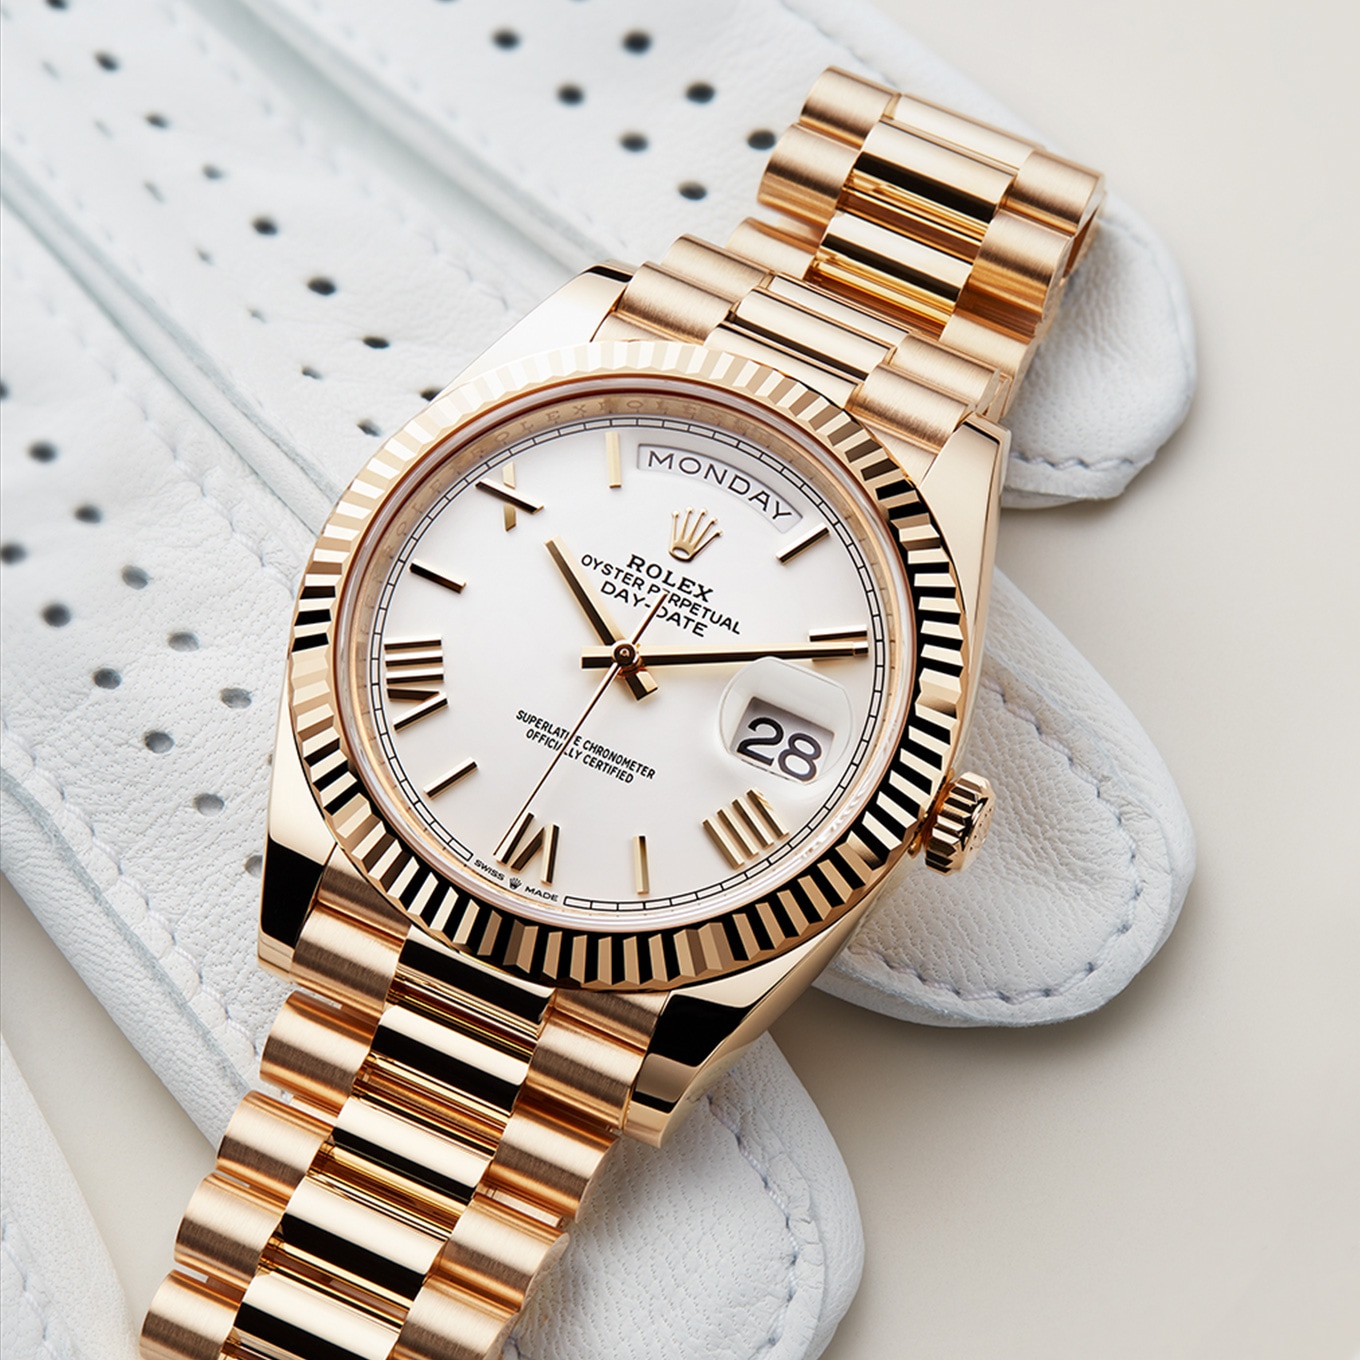 Rolex 2018 Rose Gold Sky Dweller Leather Strap Ivory / White DialRolex 2018 Sea-Dweller SD43 MK1, 126600, Box & Papers